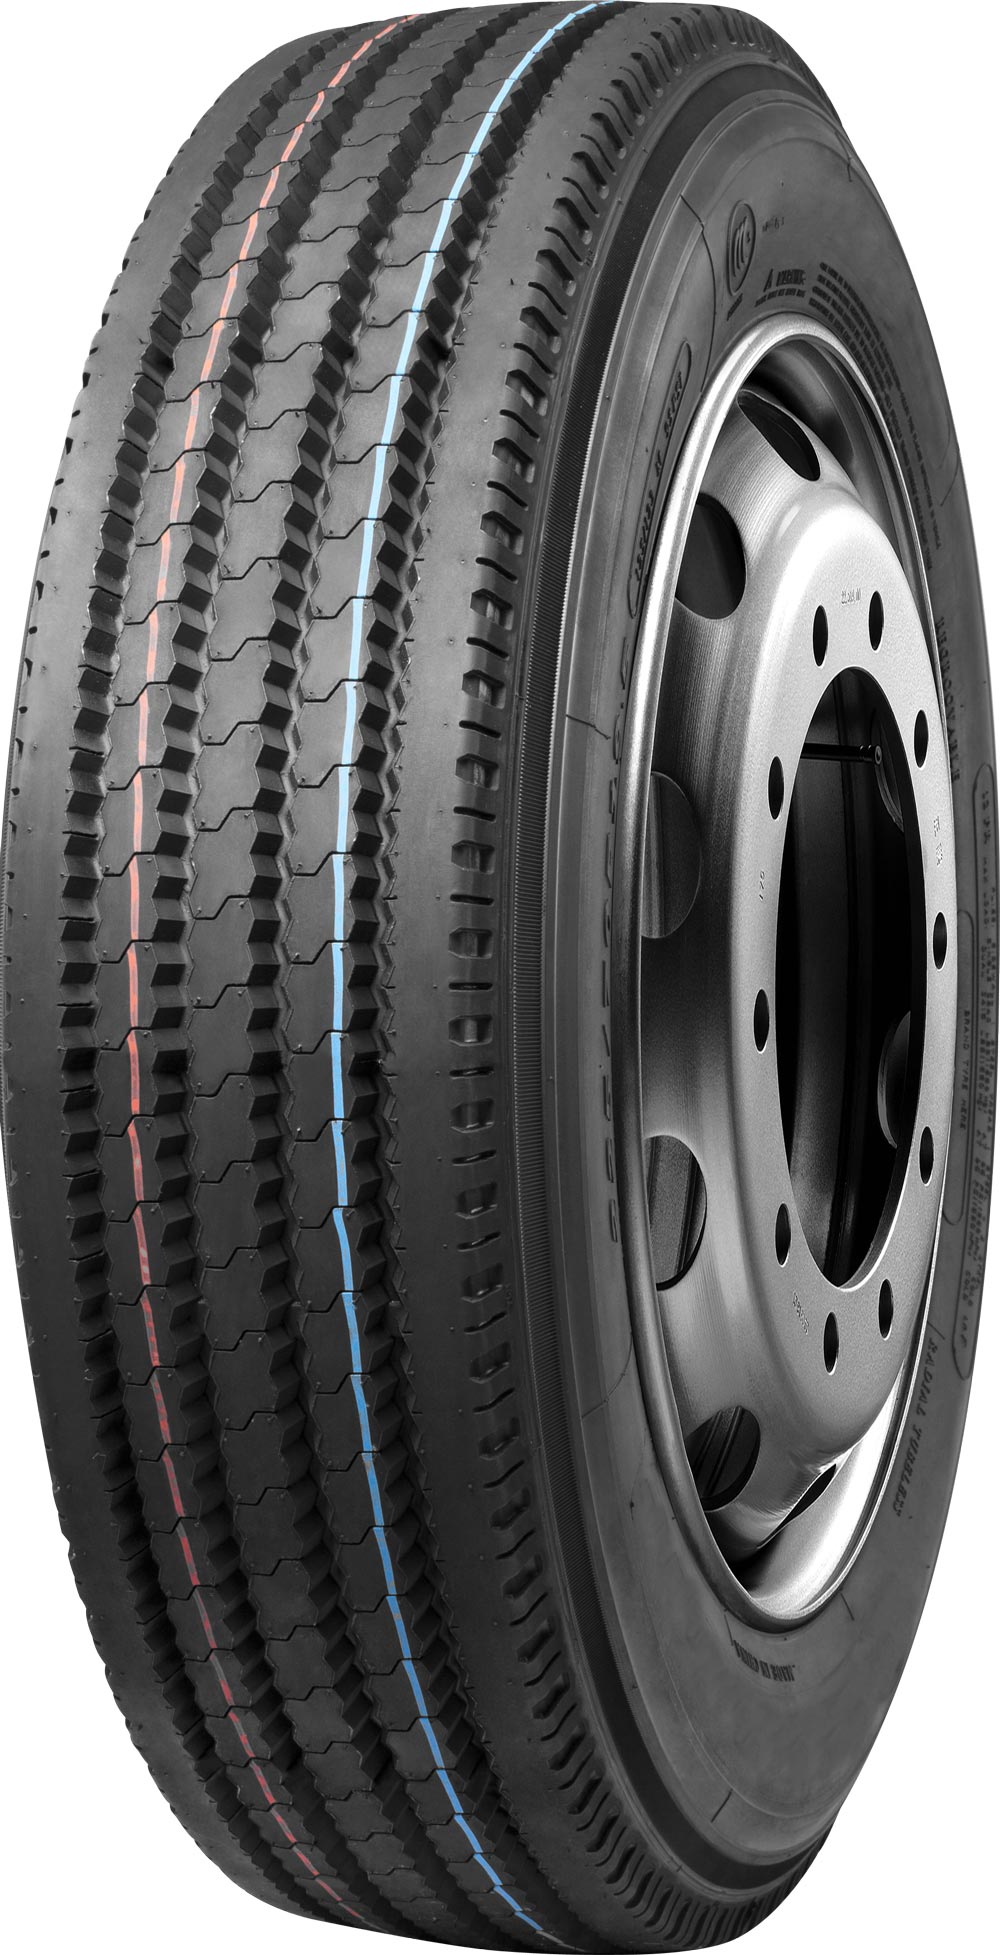 product_type-heavy_tires Barkley BL207 16 TL 245/70 R19.5 136M